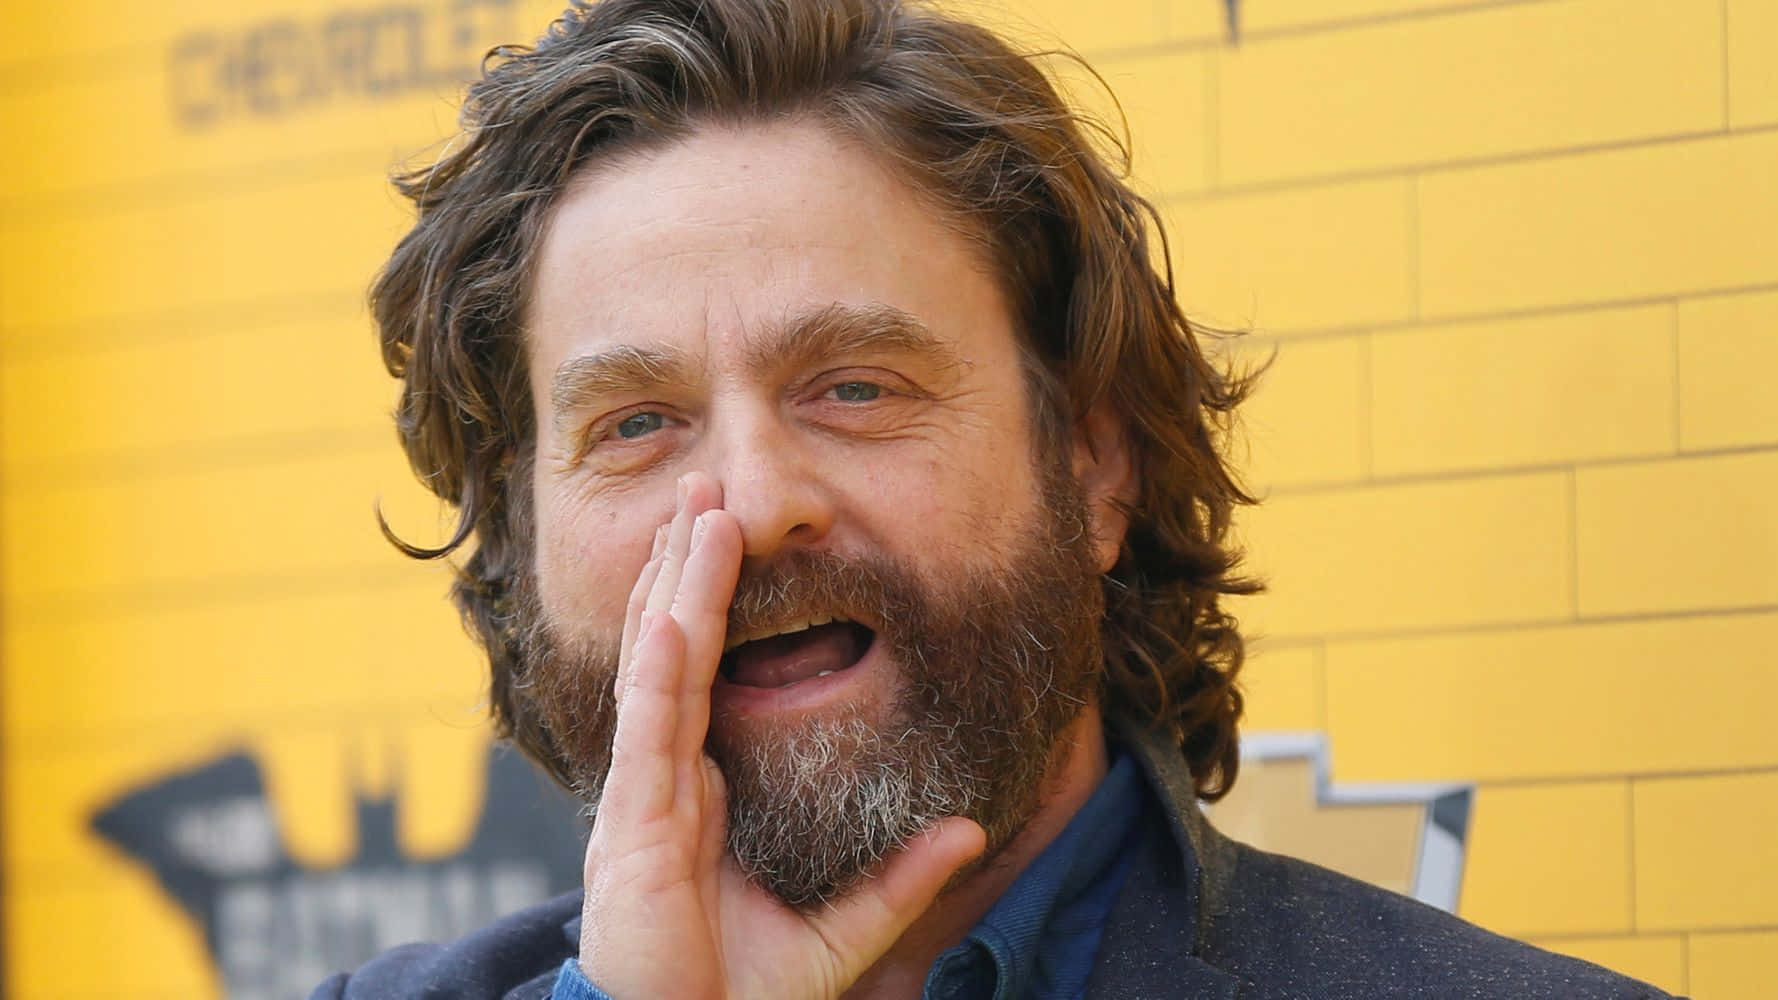 Zach Galifianakis - American Actor Comedian and Producer Wallpaper